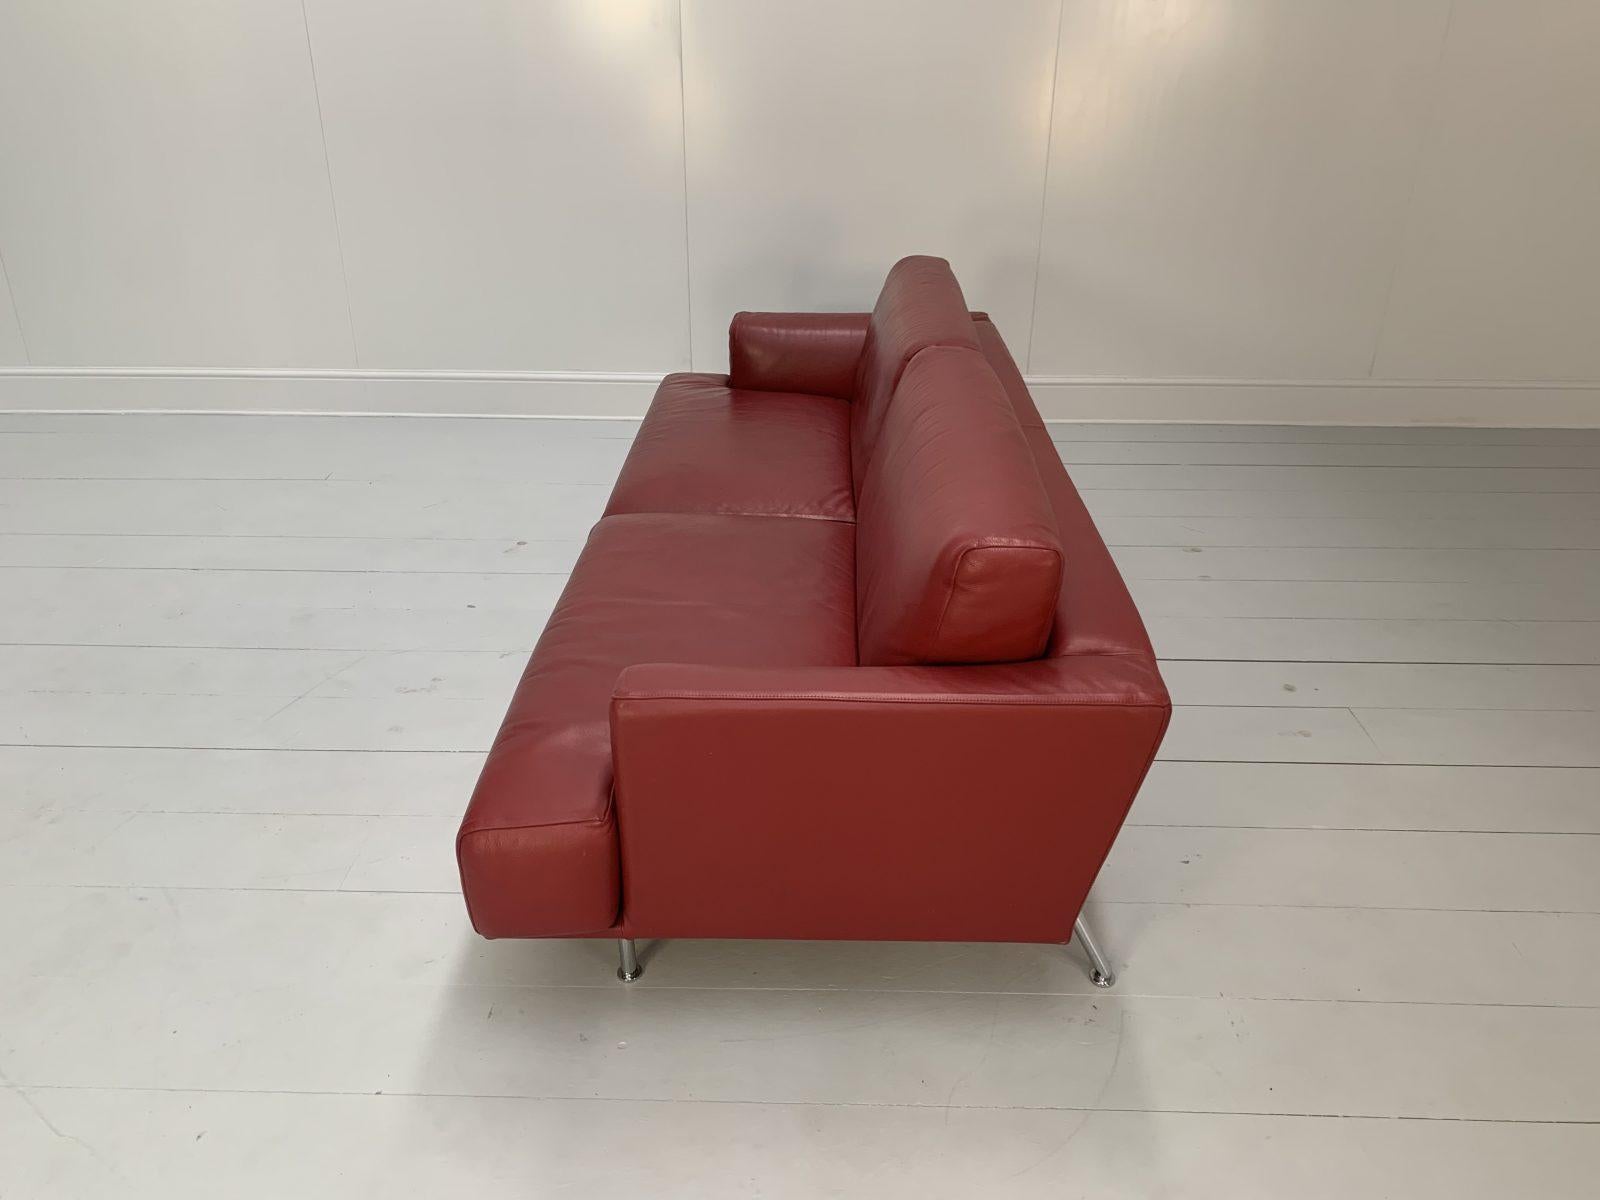 Cassina “253 Nest” 2.5-Seat Sofa & Bench Footstool – In Red “Pelle” Leather 10